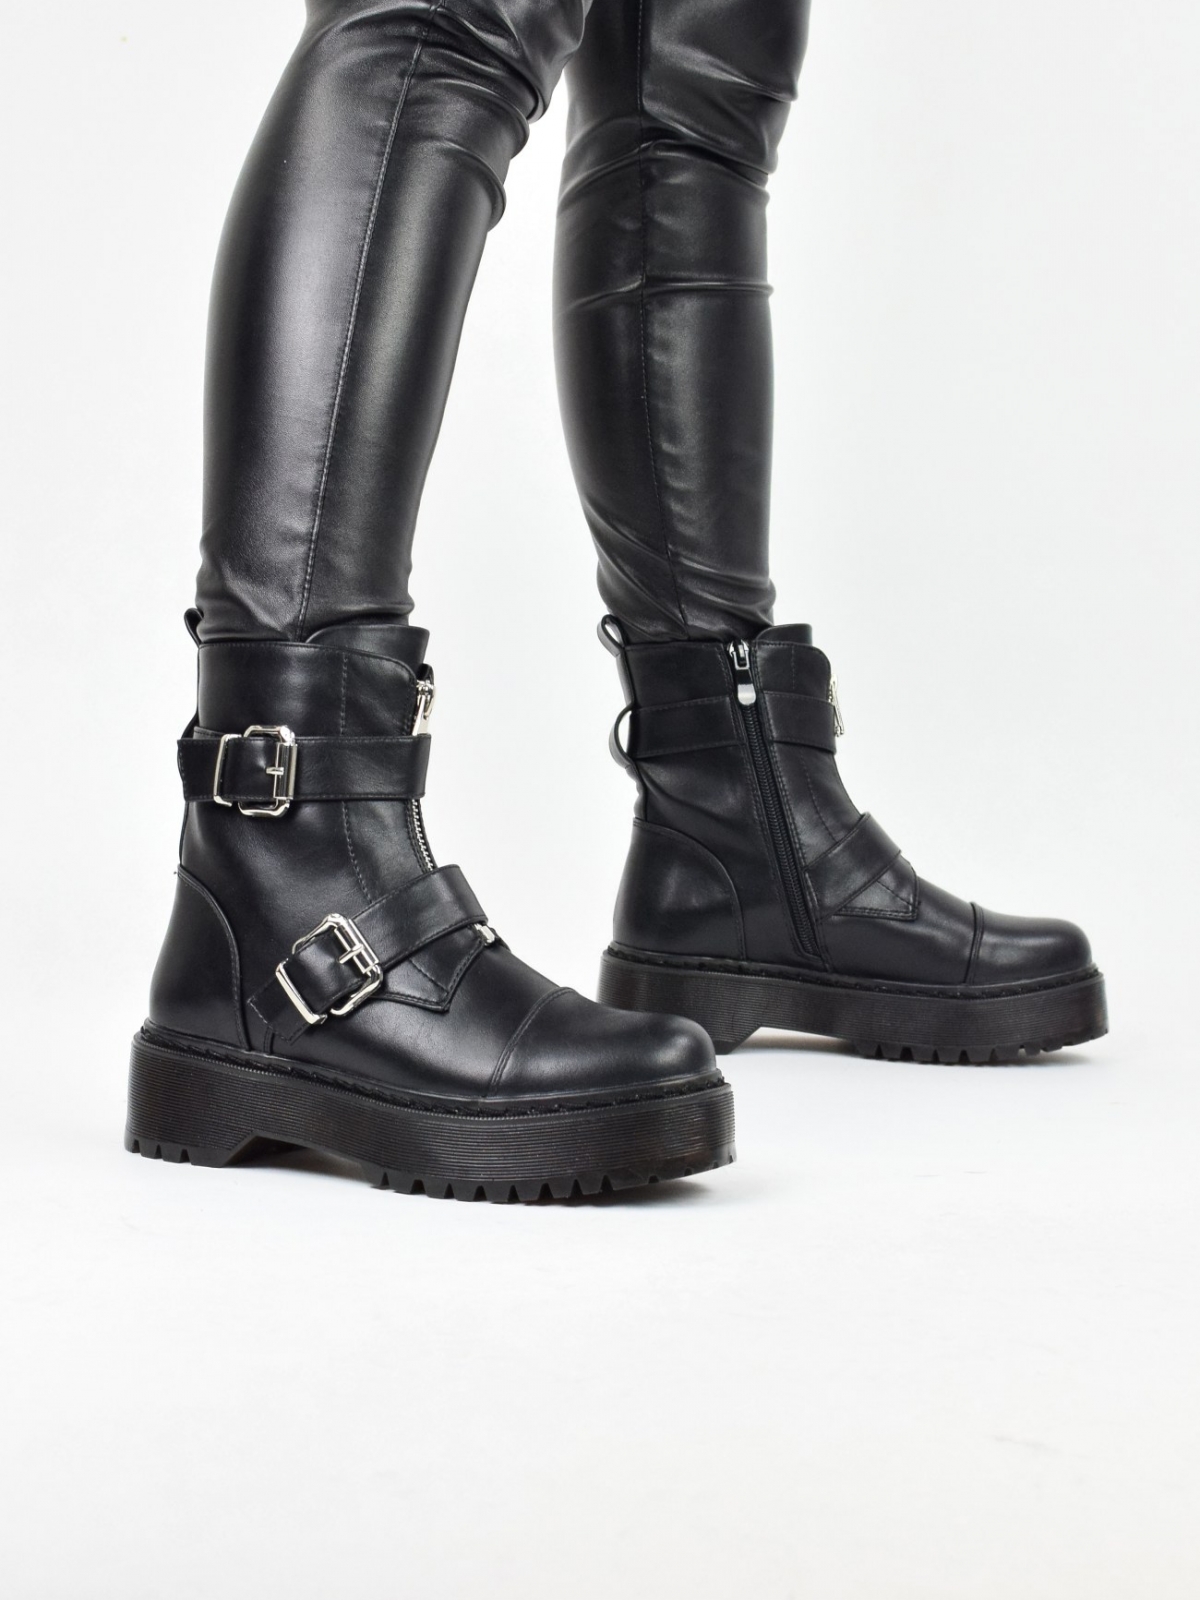 Chunky ankle boots with side metal details in black